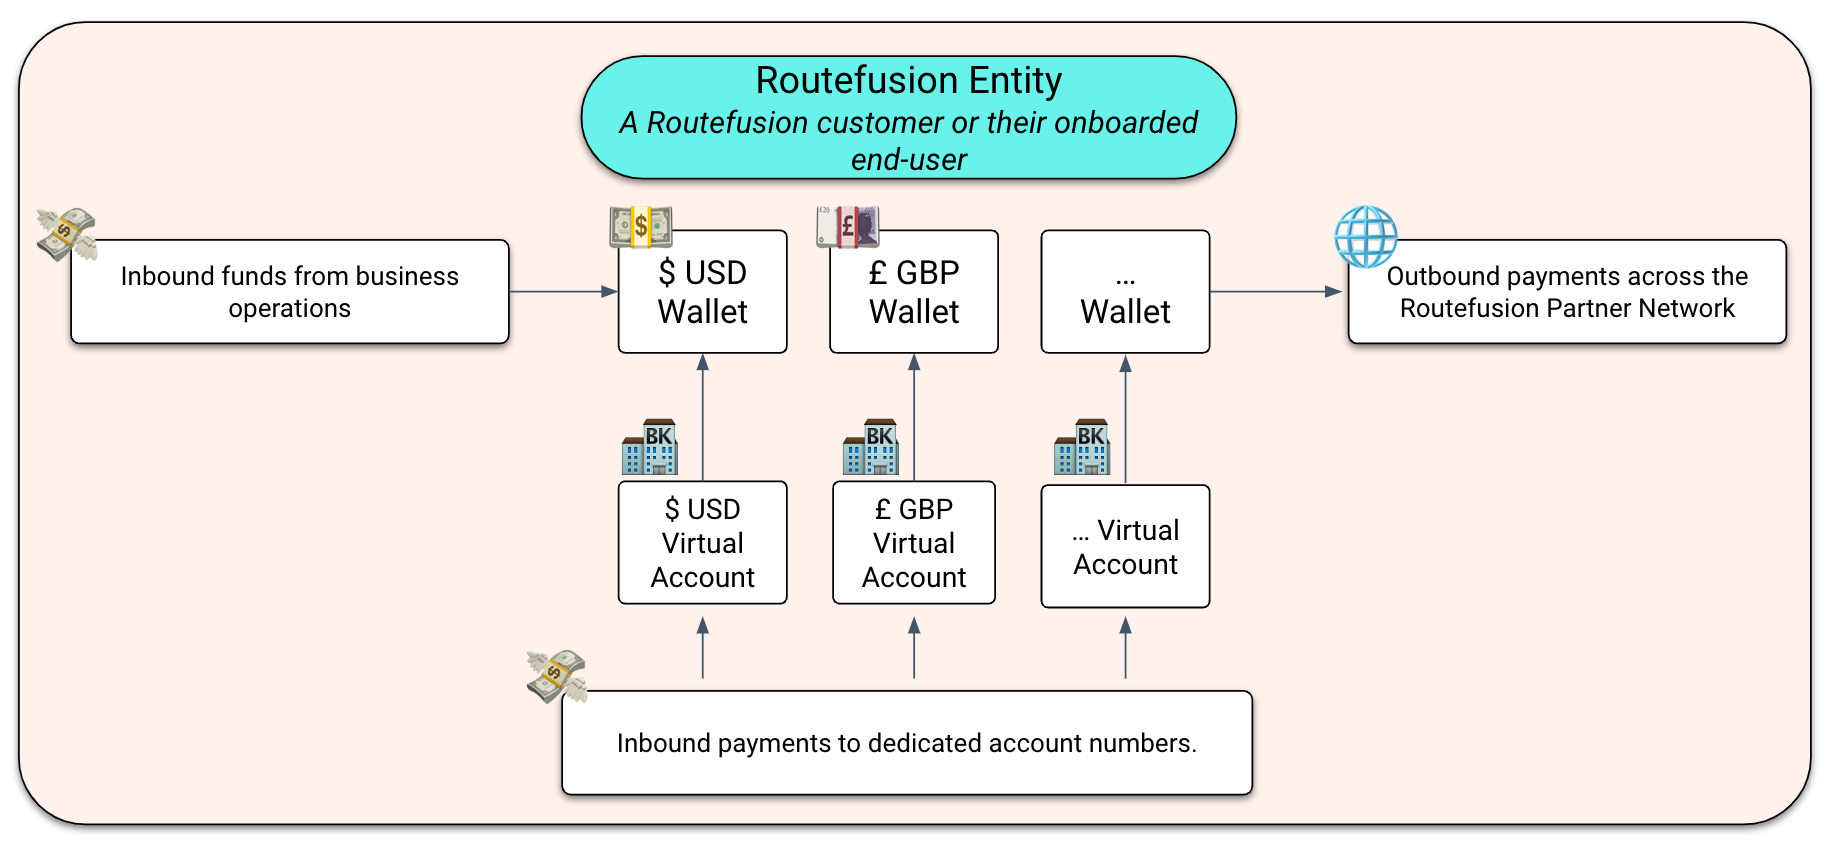 Using virtual accounts and wallets in the Routefusion ecosystem